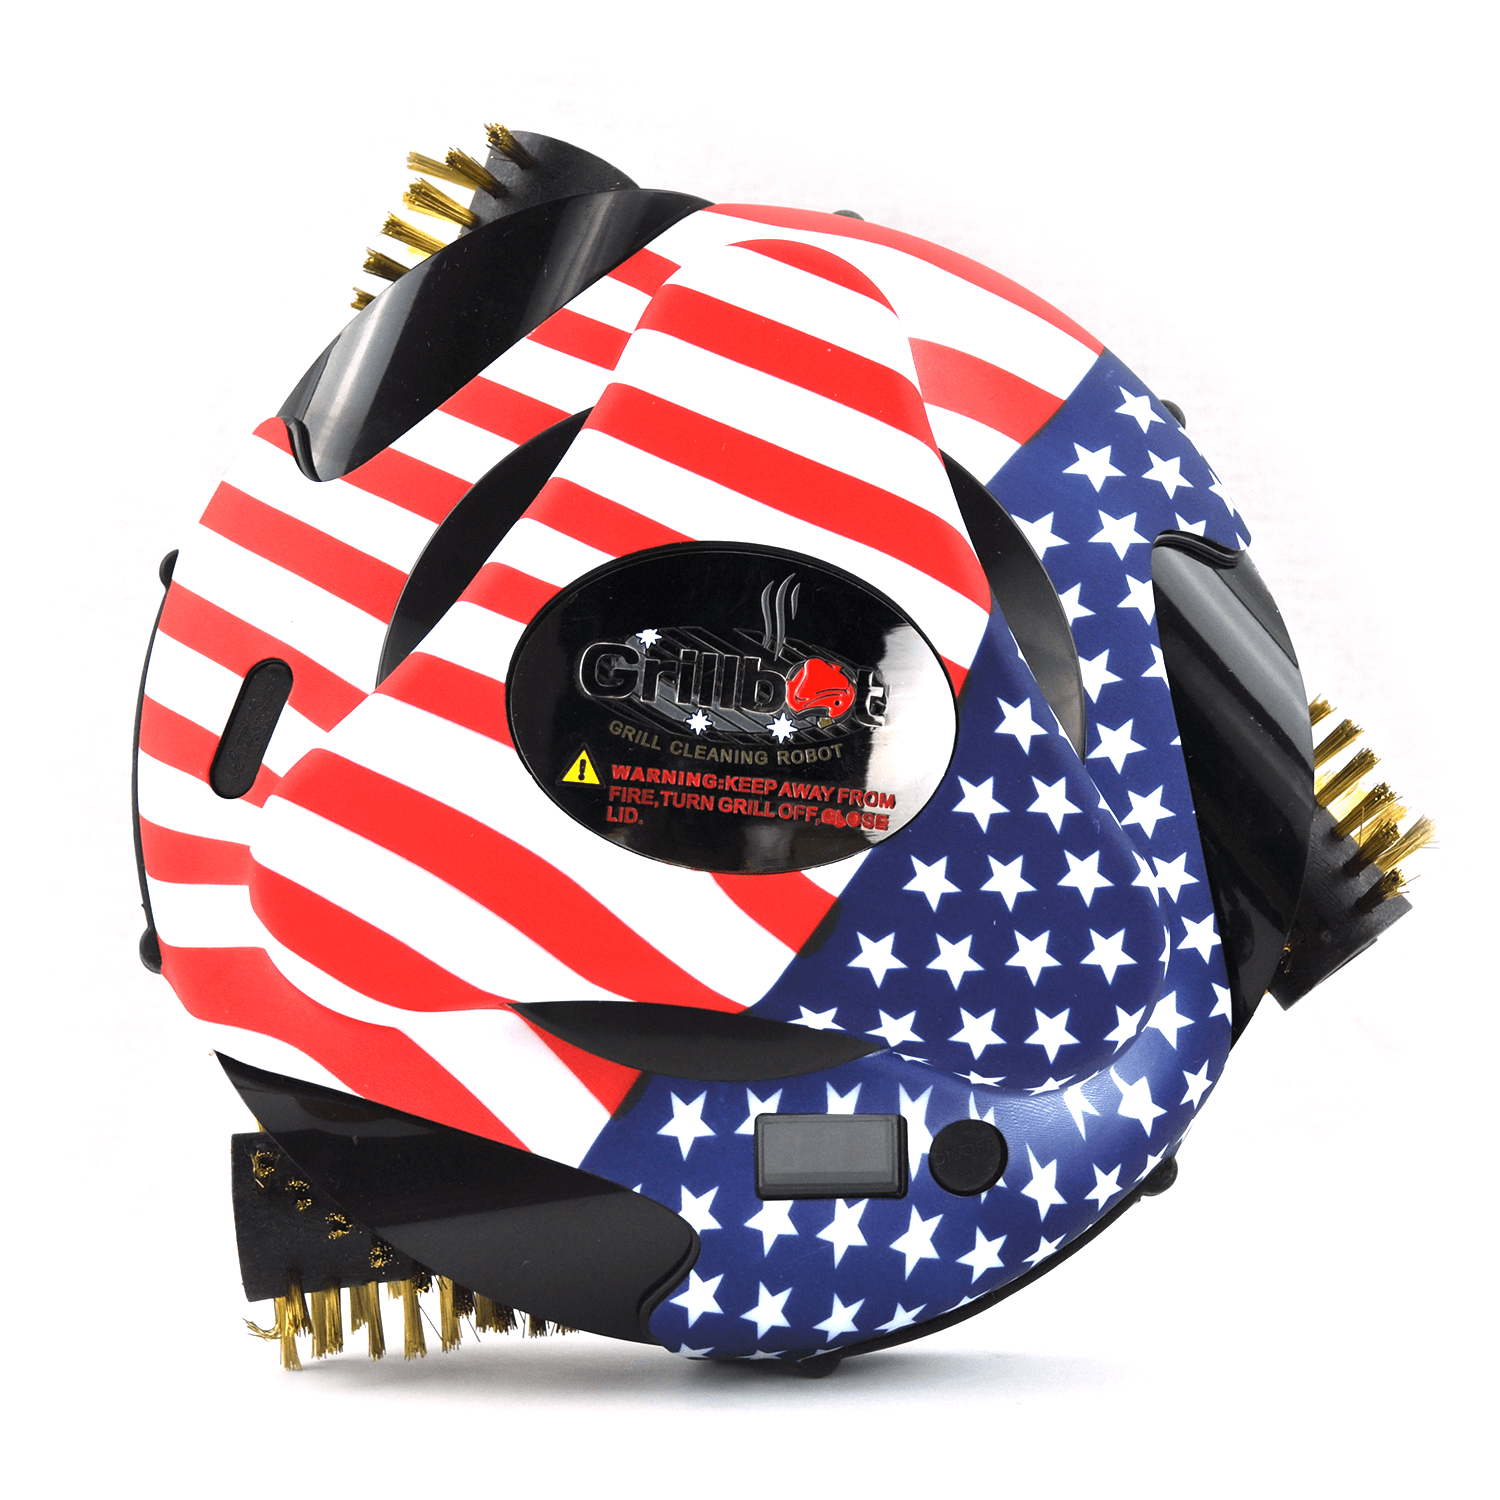 Patriot Printed Grillbot Silicone Covers